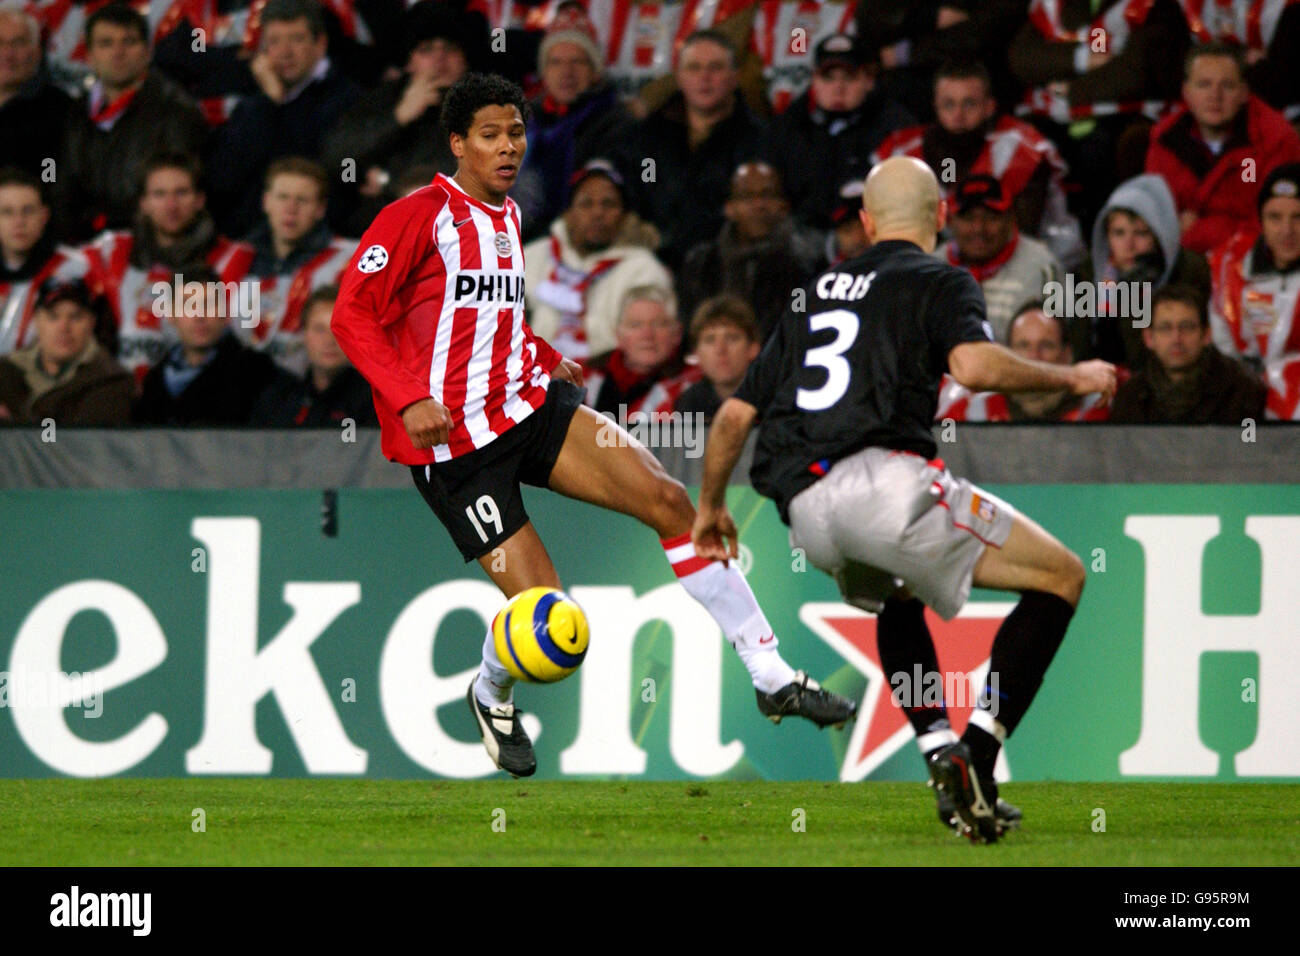 Soccer - UEFA Champions League - Round of 16 - First Leg - PSV Eindhoven v Olympique Lyonnais - Philips Stadium. PSV Eindhoven's Michael Lamey and Olympique Lyonnais' Cris battle for the ball Stock Photo